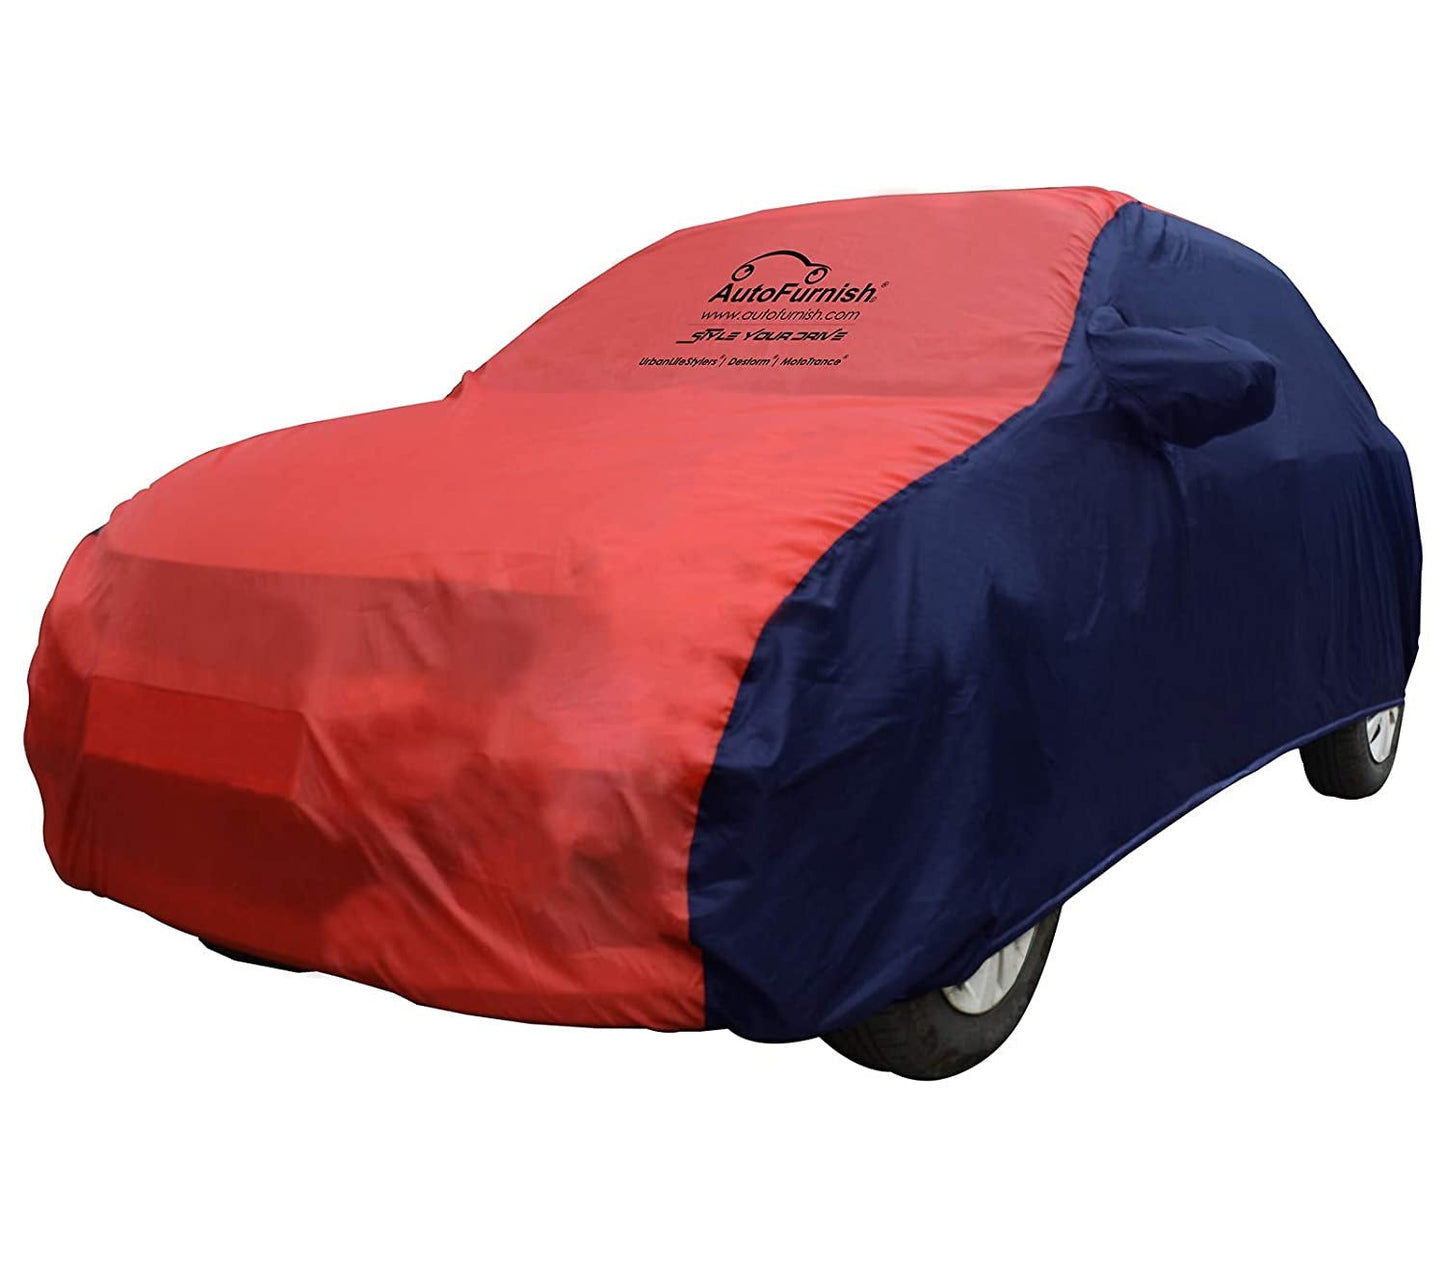 Skoda Kodiaq Car Body Cover, Triple Stitched, Heat & Water Resistant with Side Mirror Pockets (SPORTY Series)